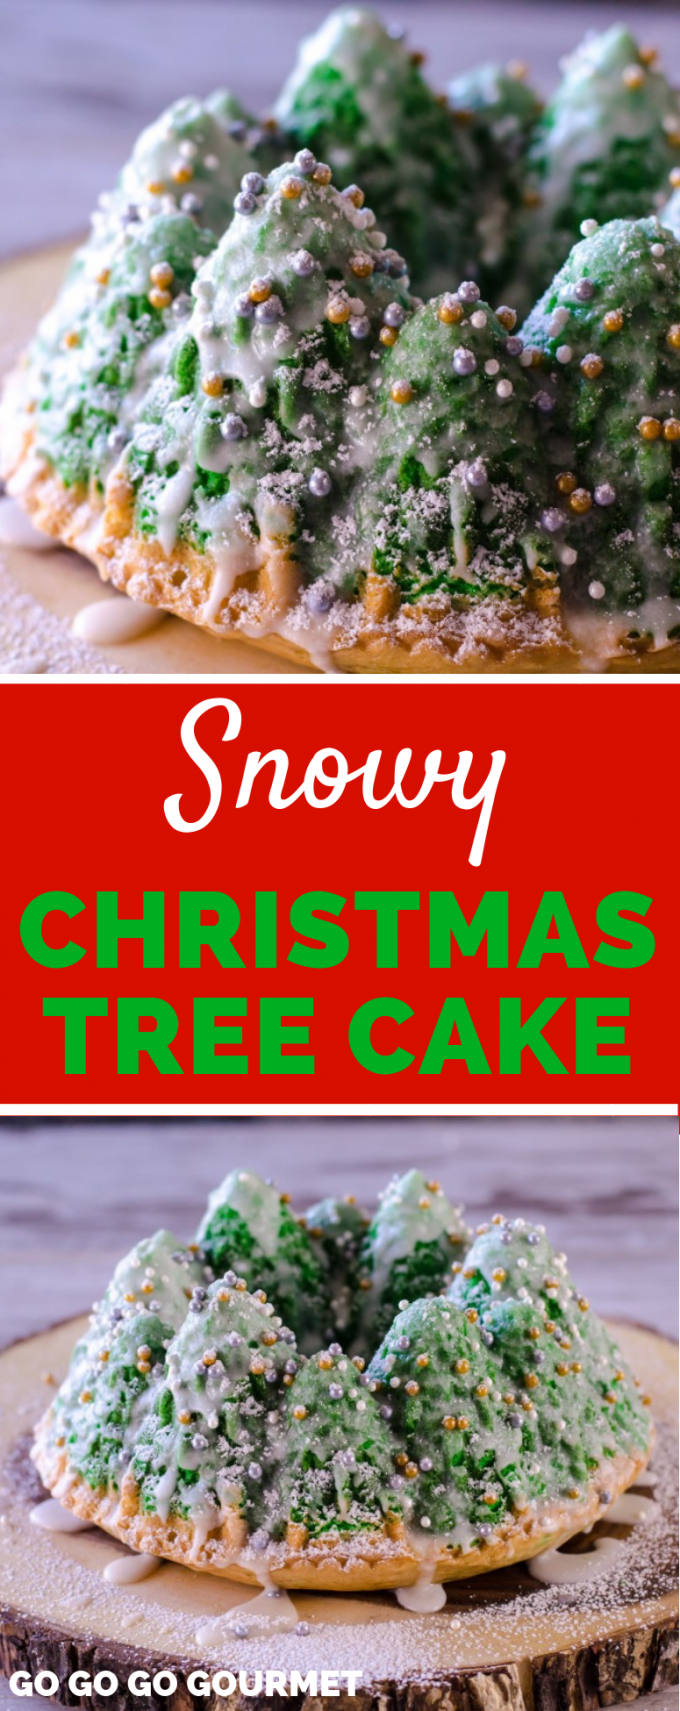 If you're wondering how to make a showstopping dessert for Christmas, look no further! A special pan makes decorating this Snowy Christmas Tree Cake so easy. Using a simple decoration like sprinkles, you can make this recipe look amazing - even without fondant! You can even add your own ideas to spice it up! #gogogogourmet #snowychristmastreecake #christmasdesserts #christmasdesserts via @gogogogourmet